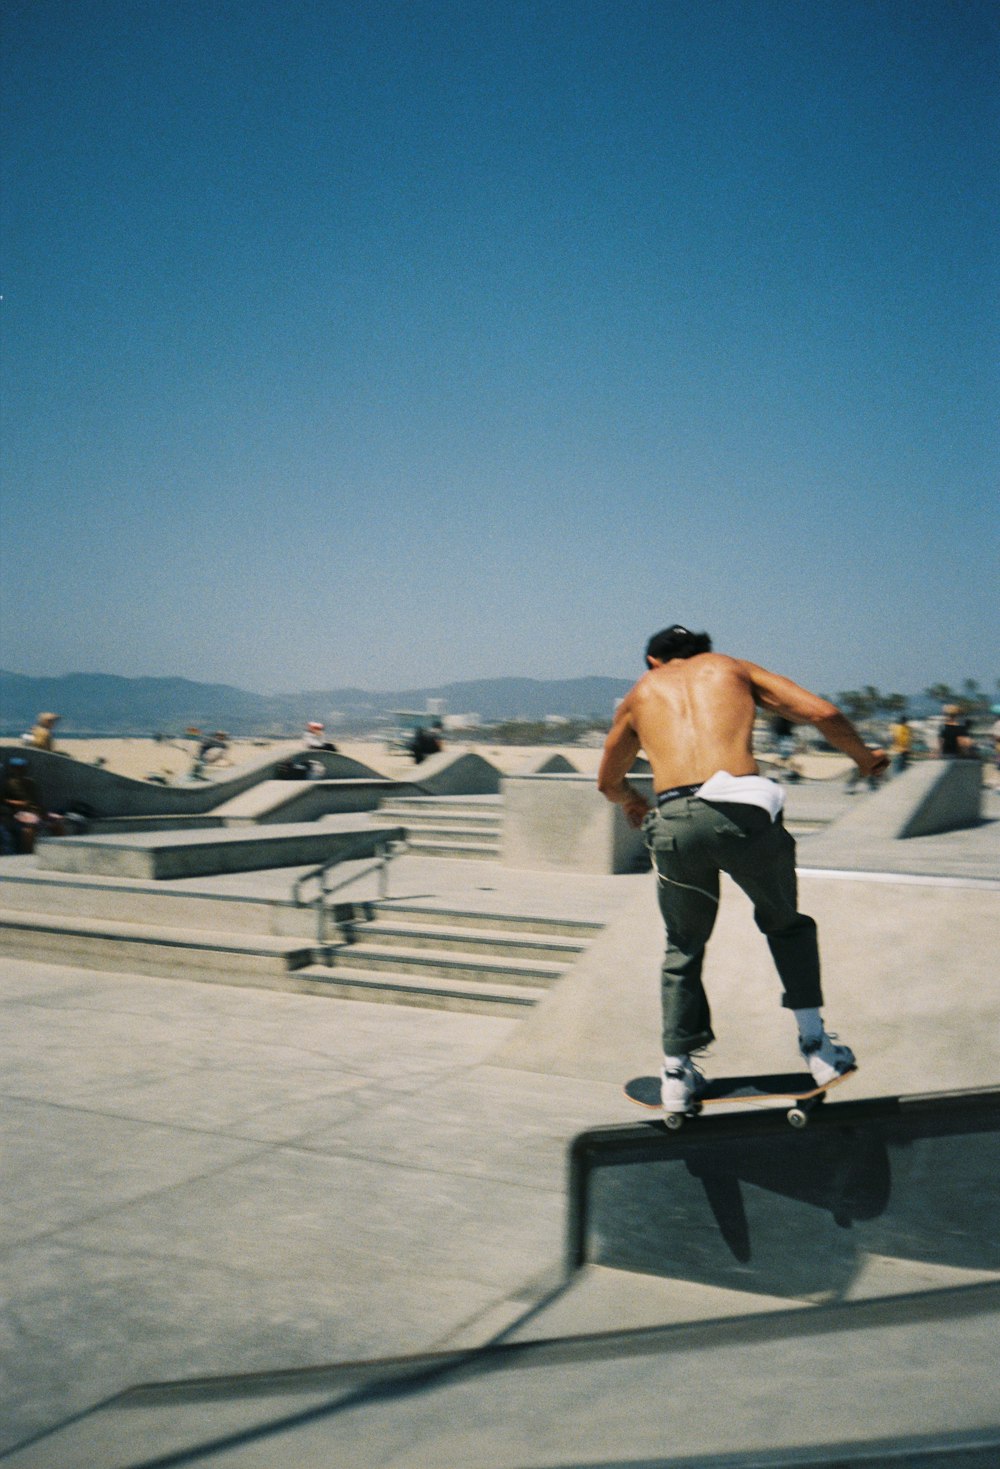 A man riding a skateboard down the side of a ramp photo – Free Venice beach  Image on Unsplash